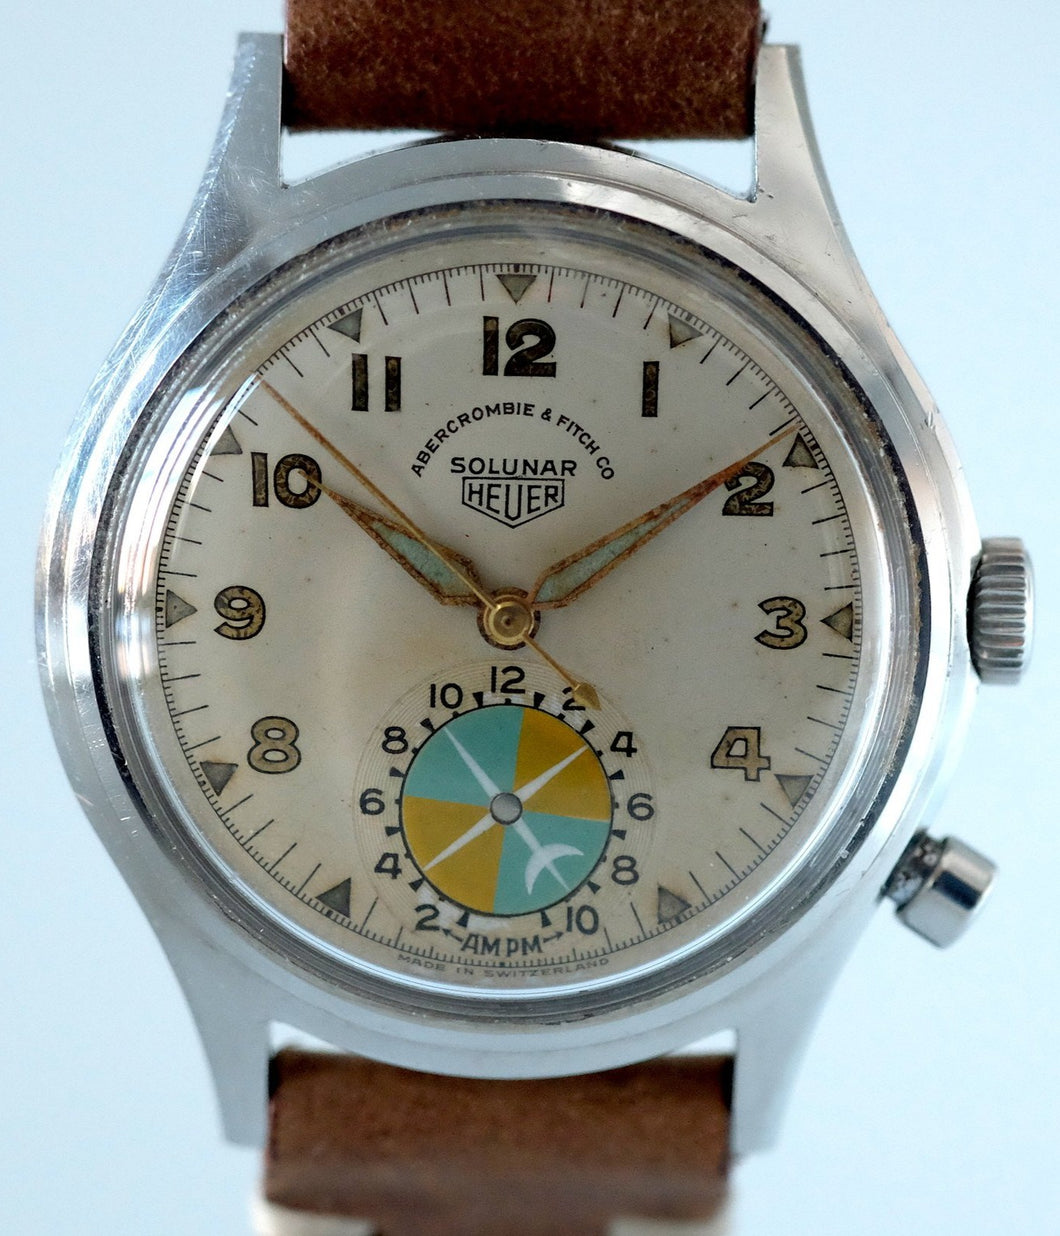 Heuer Solunar for Abercrombie & Fitch